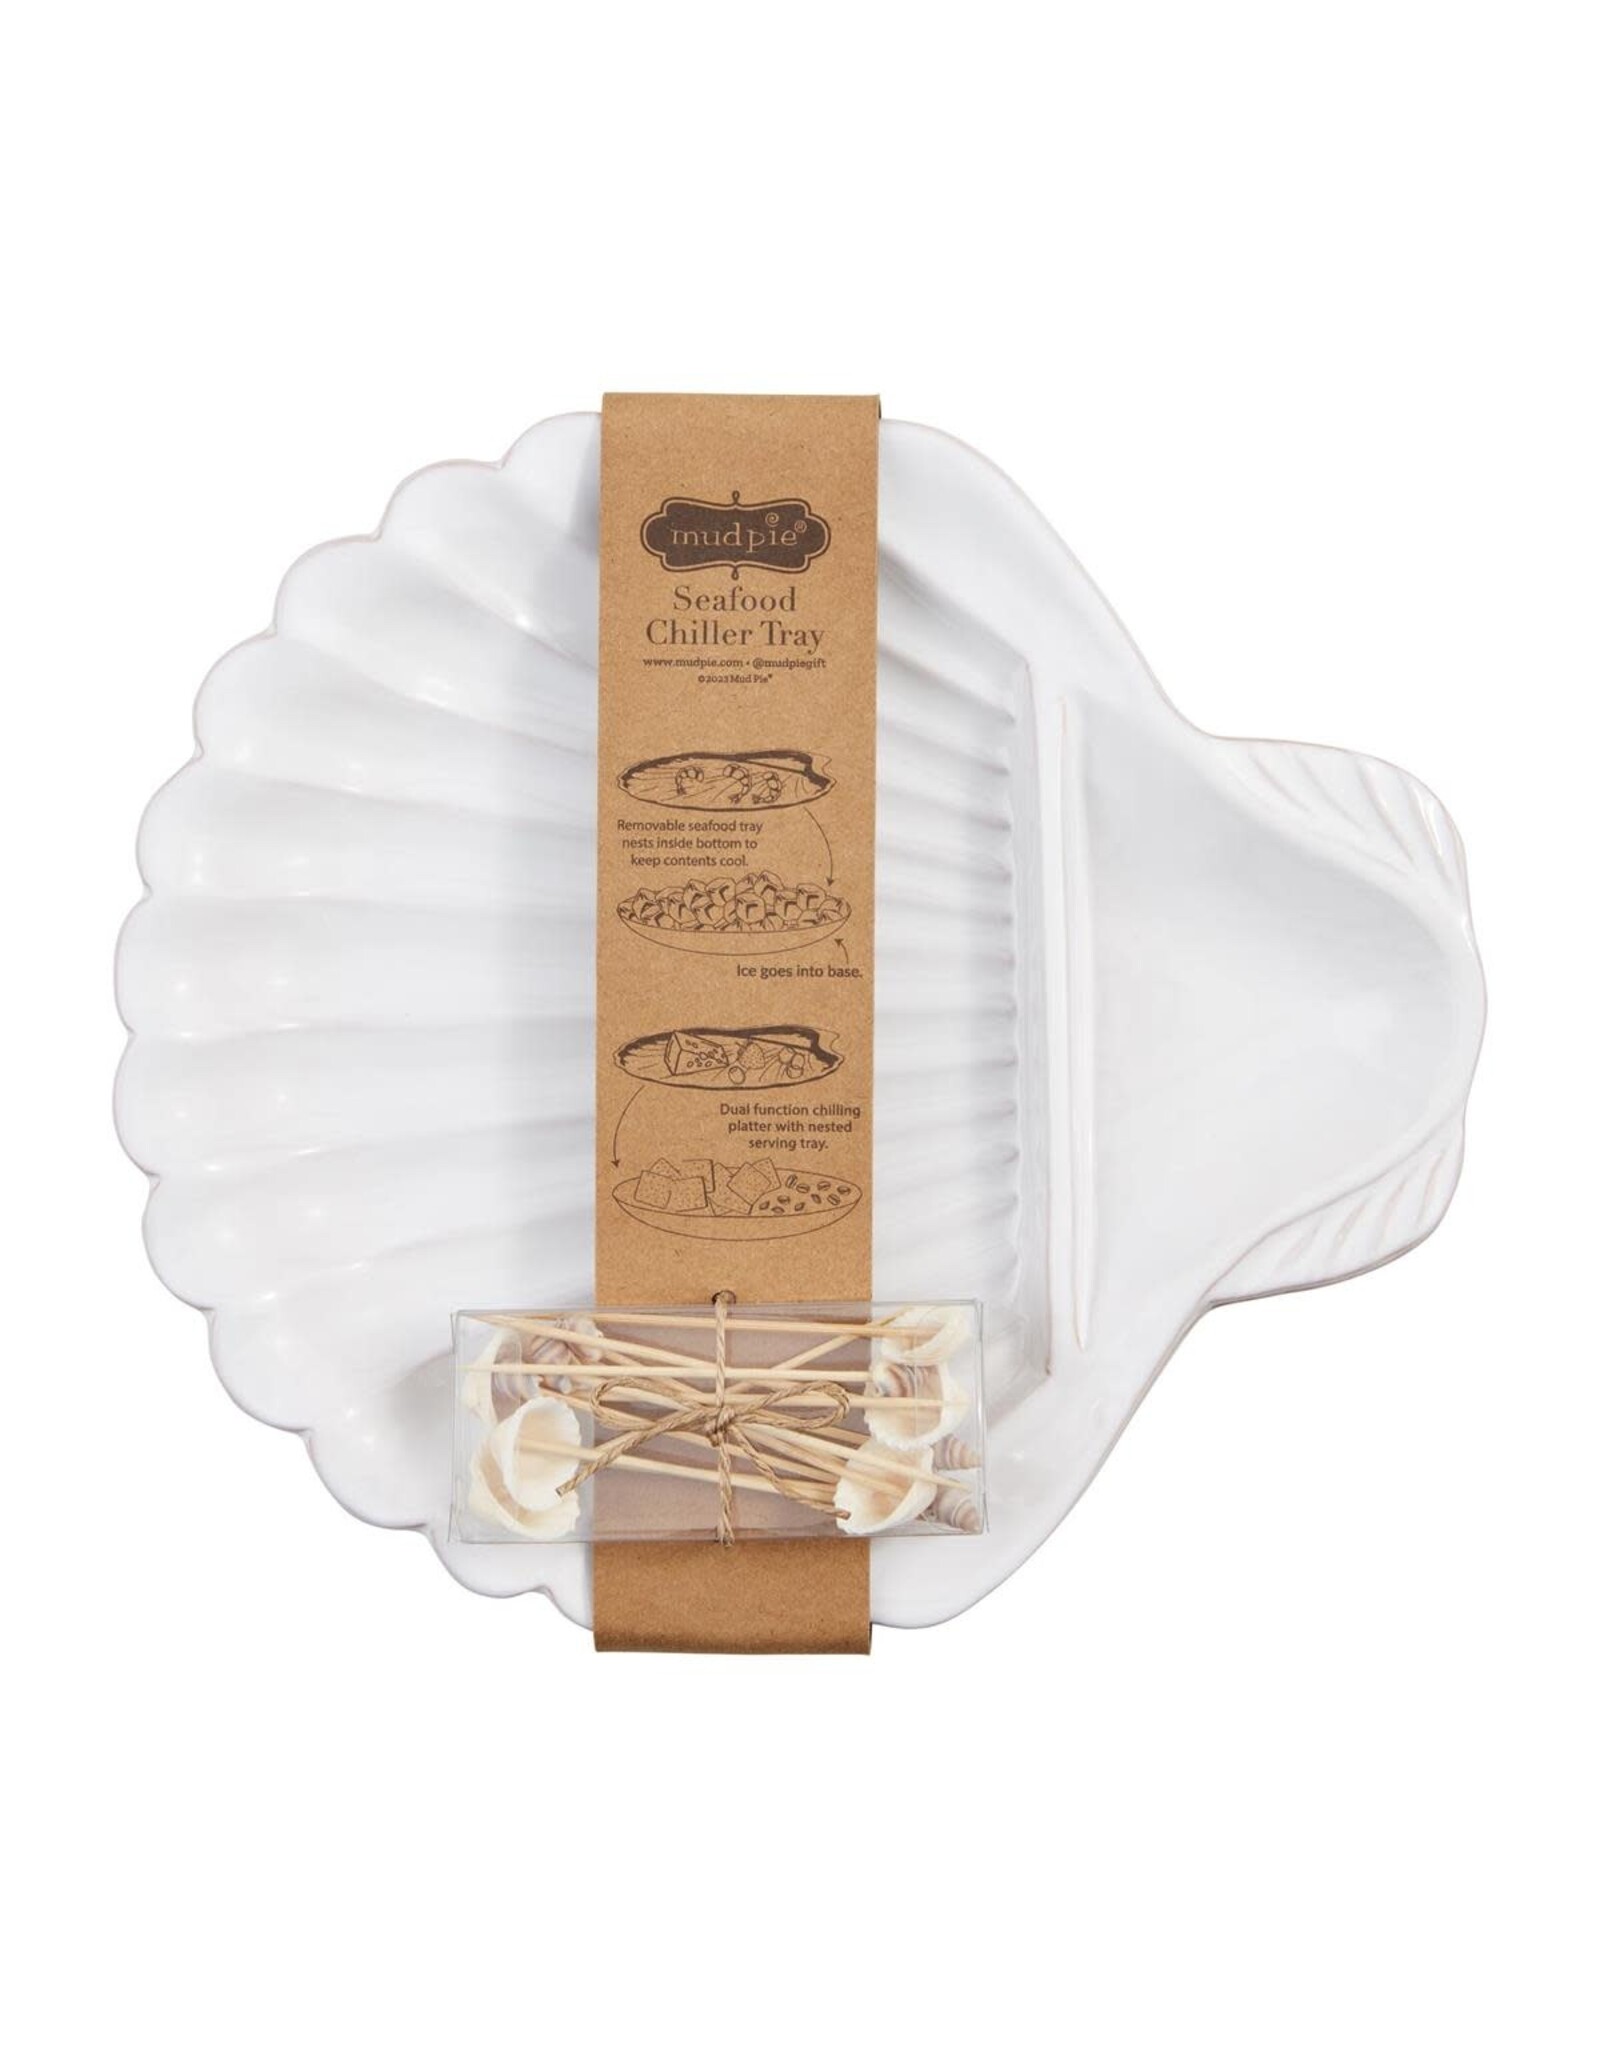 Mud Pie Seafood Chiller Tray With Shell Toothpicks Set